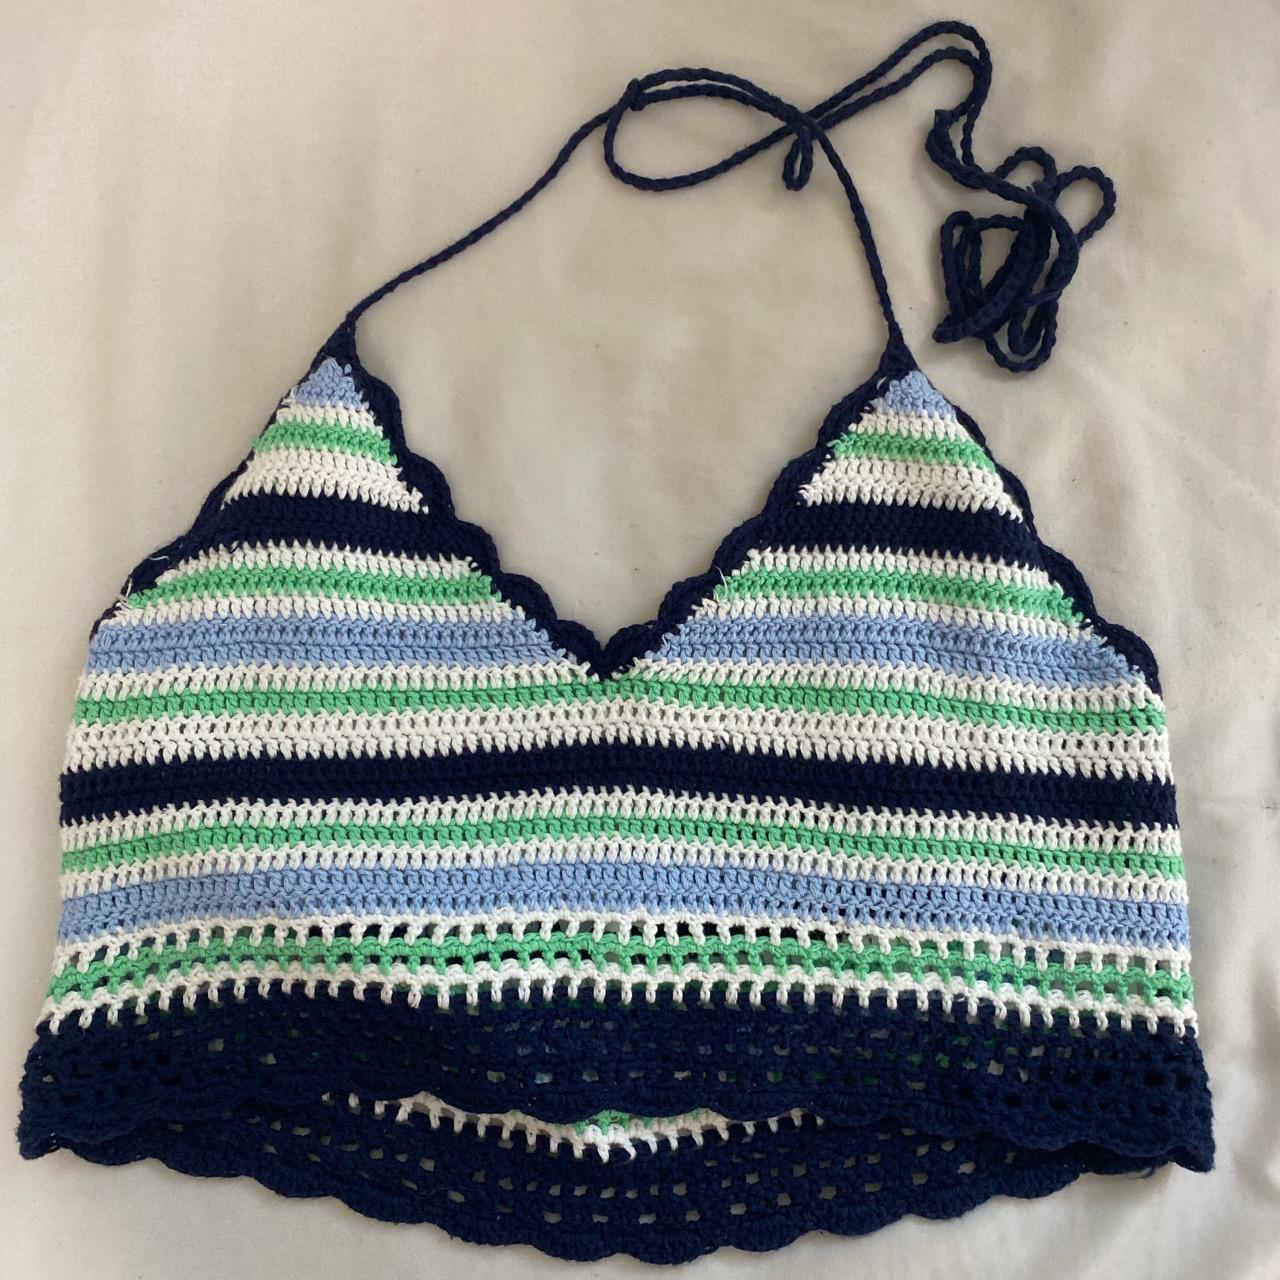 Aerie Crochet Top With tags never worn Size... - Depop